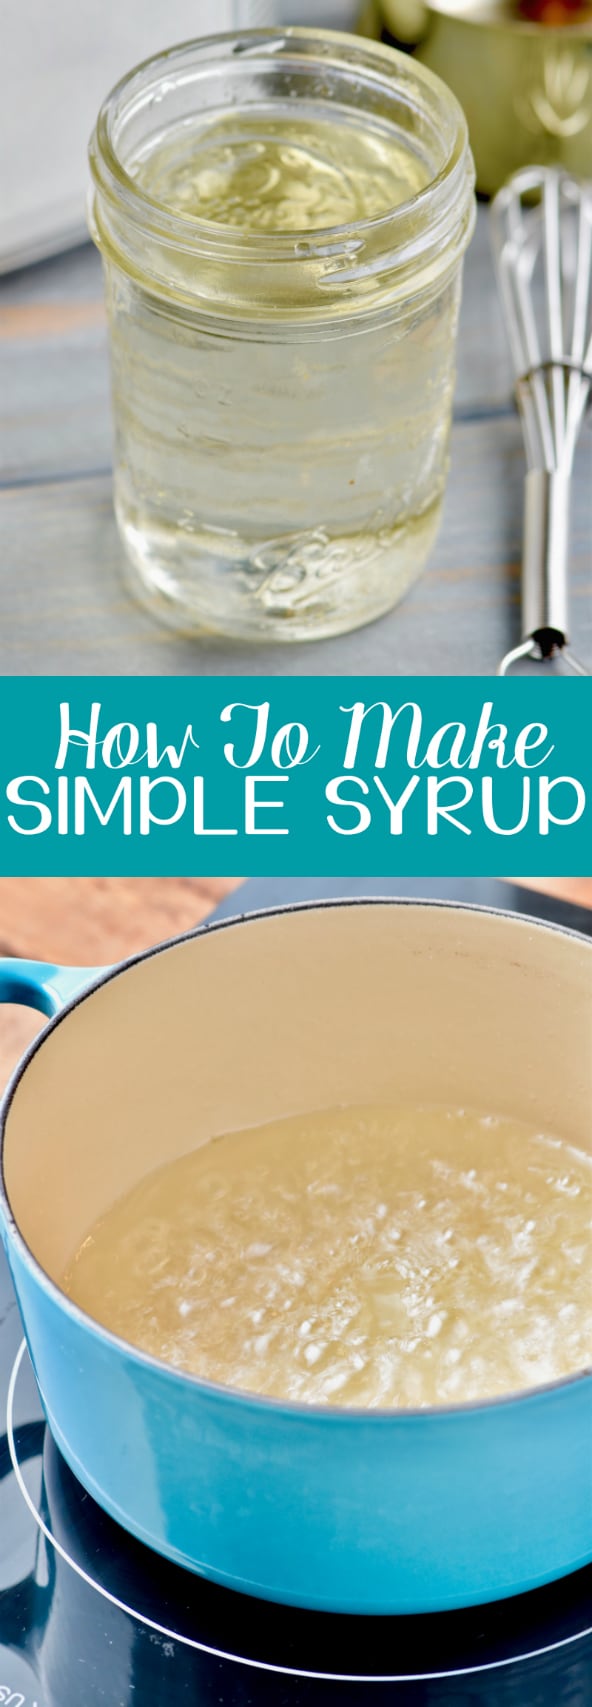 Simple syrup for cocktails is easy to make at home!